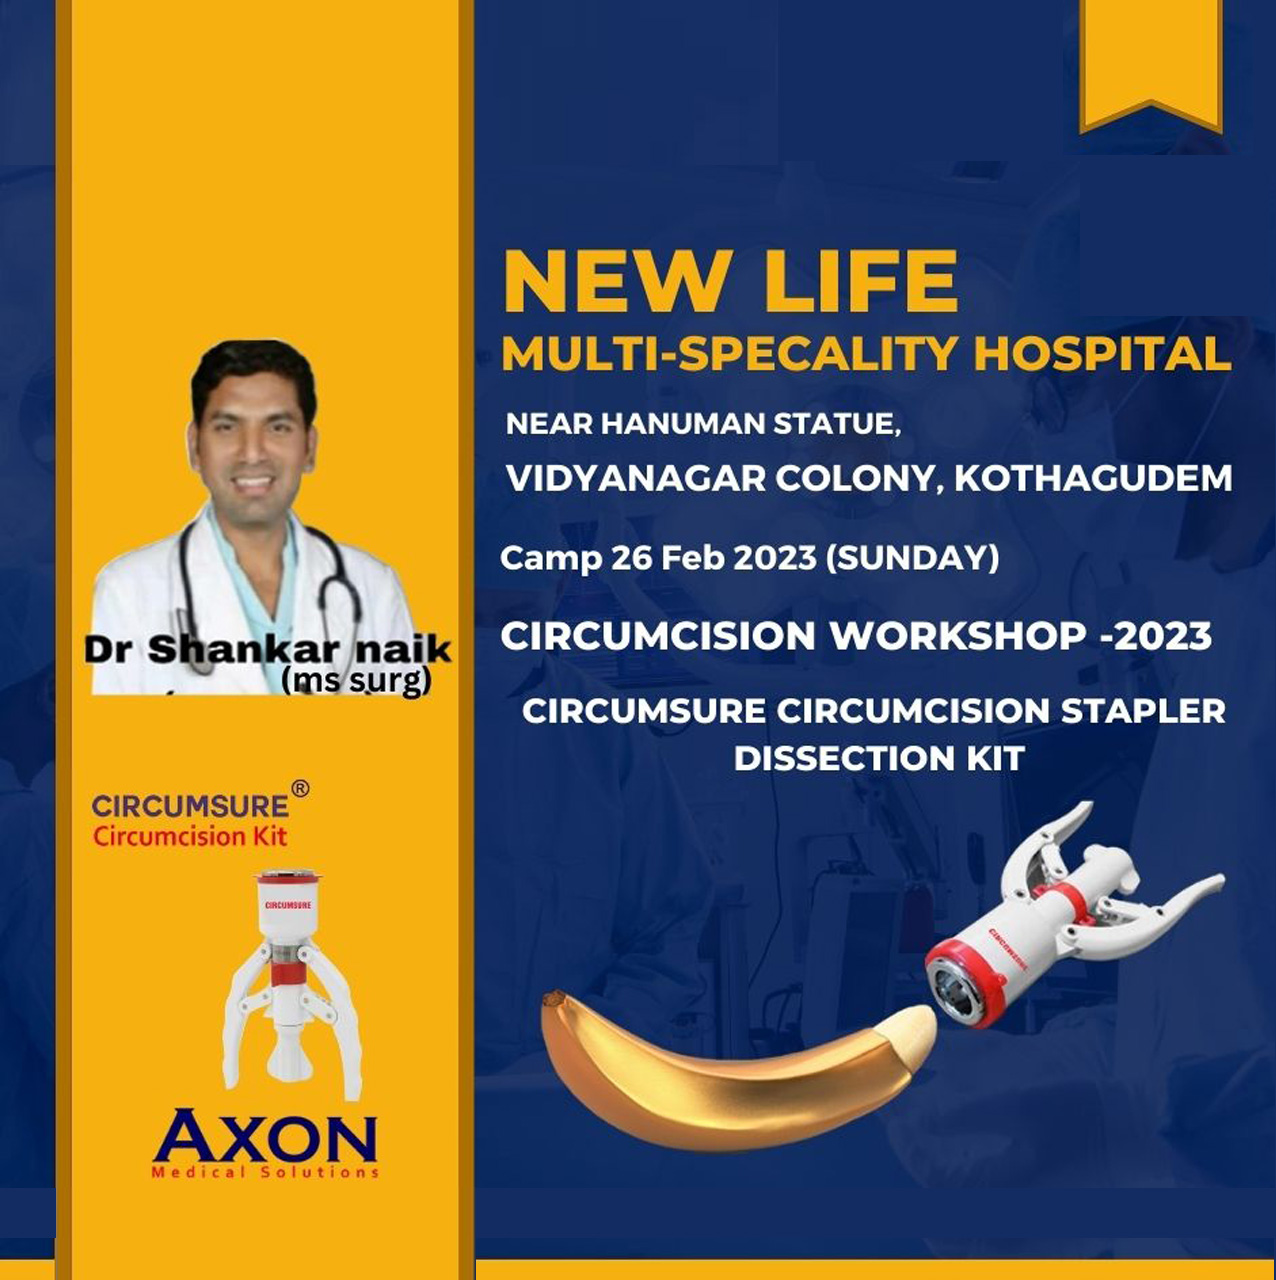  We are excited to have Dr. Shankar Naik of New Life Hospital, Kothagudem conduct a Male Circumcision workshop